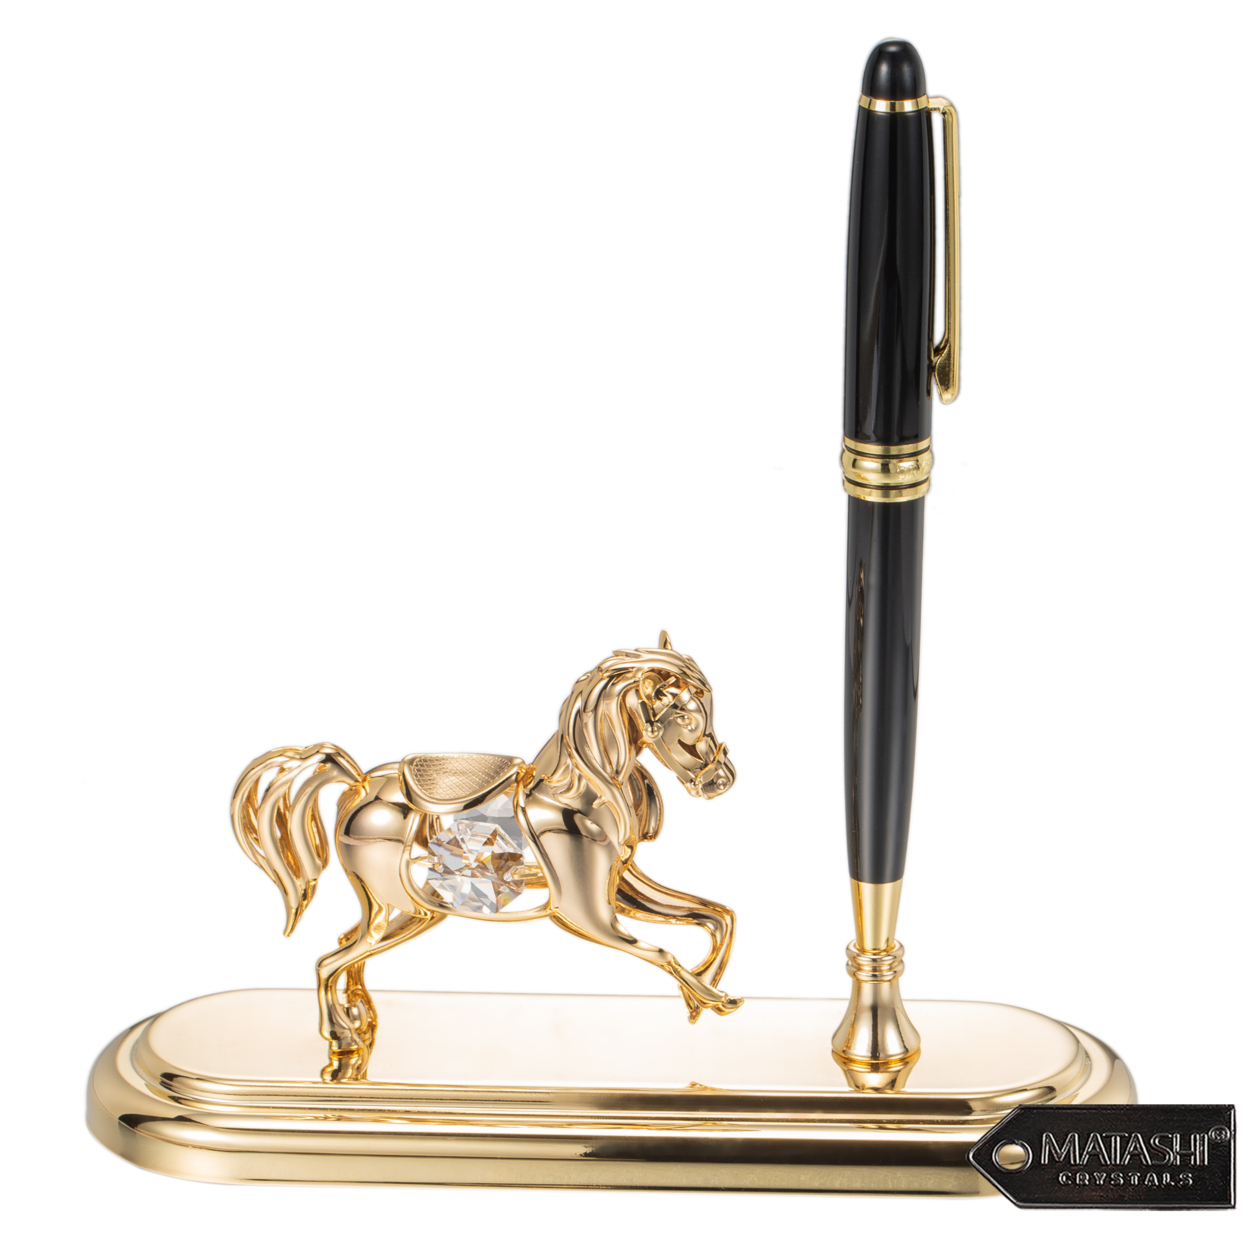 24K Gold Plated Executive Desk Set With Pen And Horse Ornament By Matashi